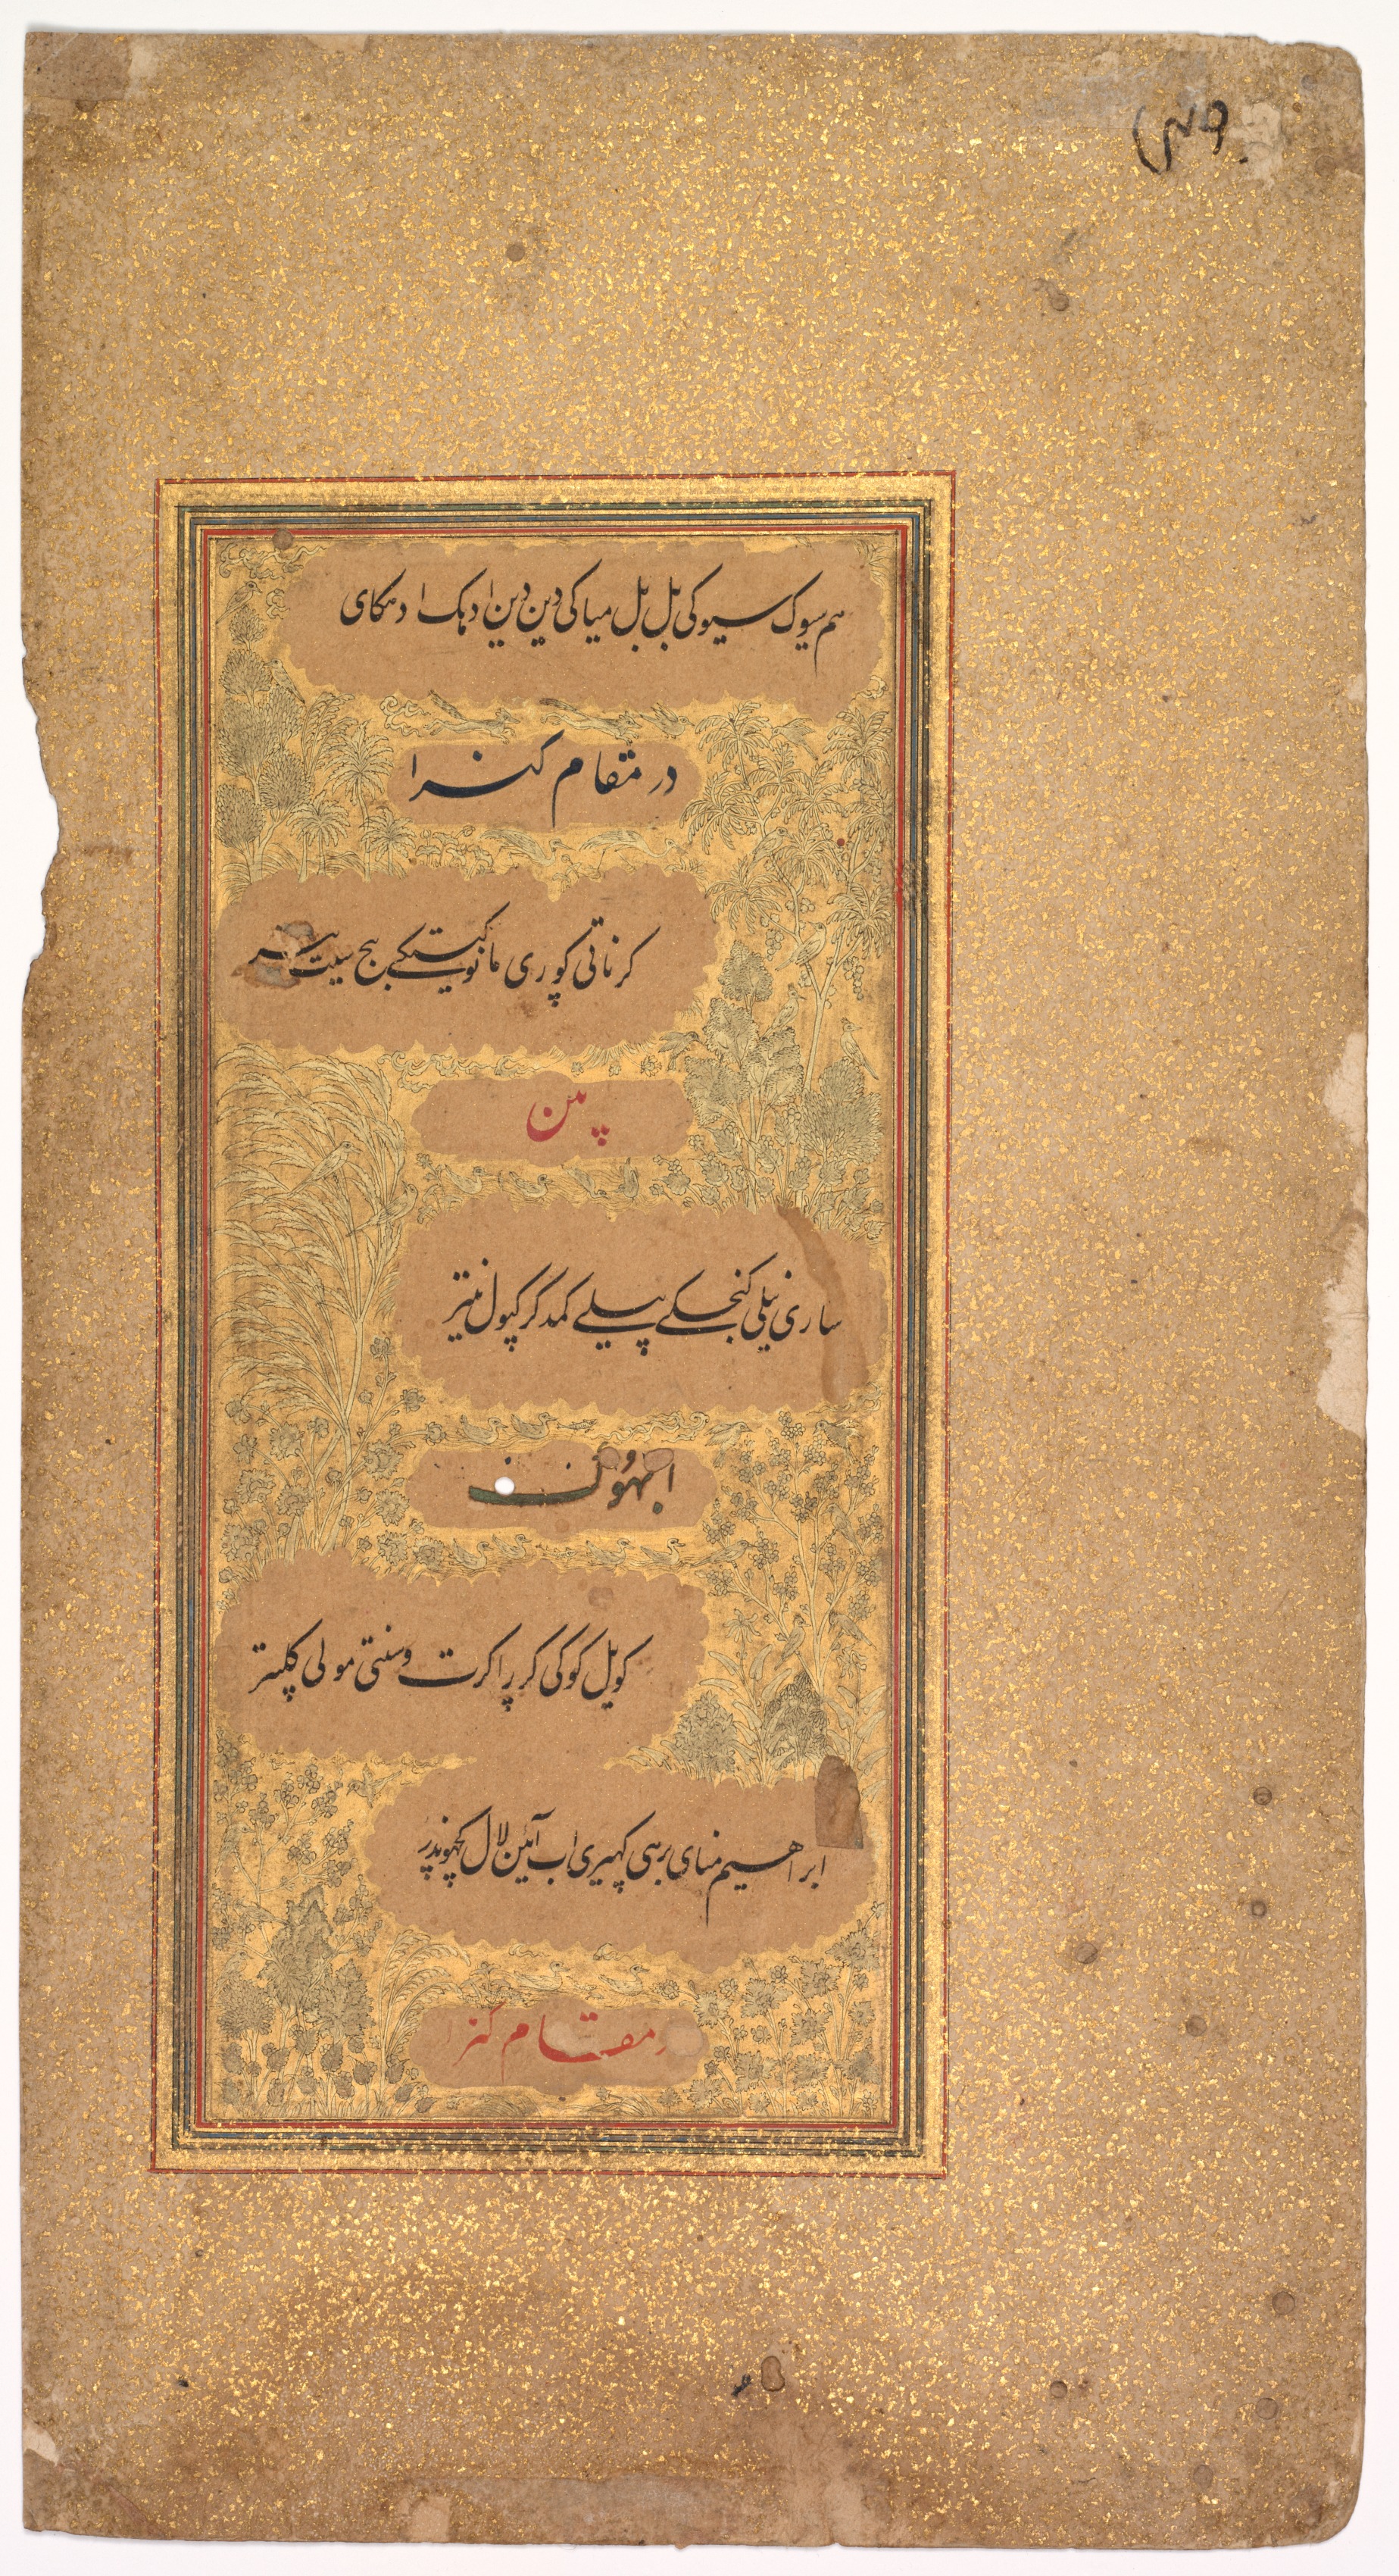 From Dohras (Songs) 40 and 36 from the Kitab-i Nauras of Sultan Ibrahim Adil Shah II (verso)